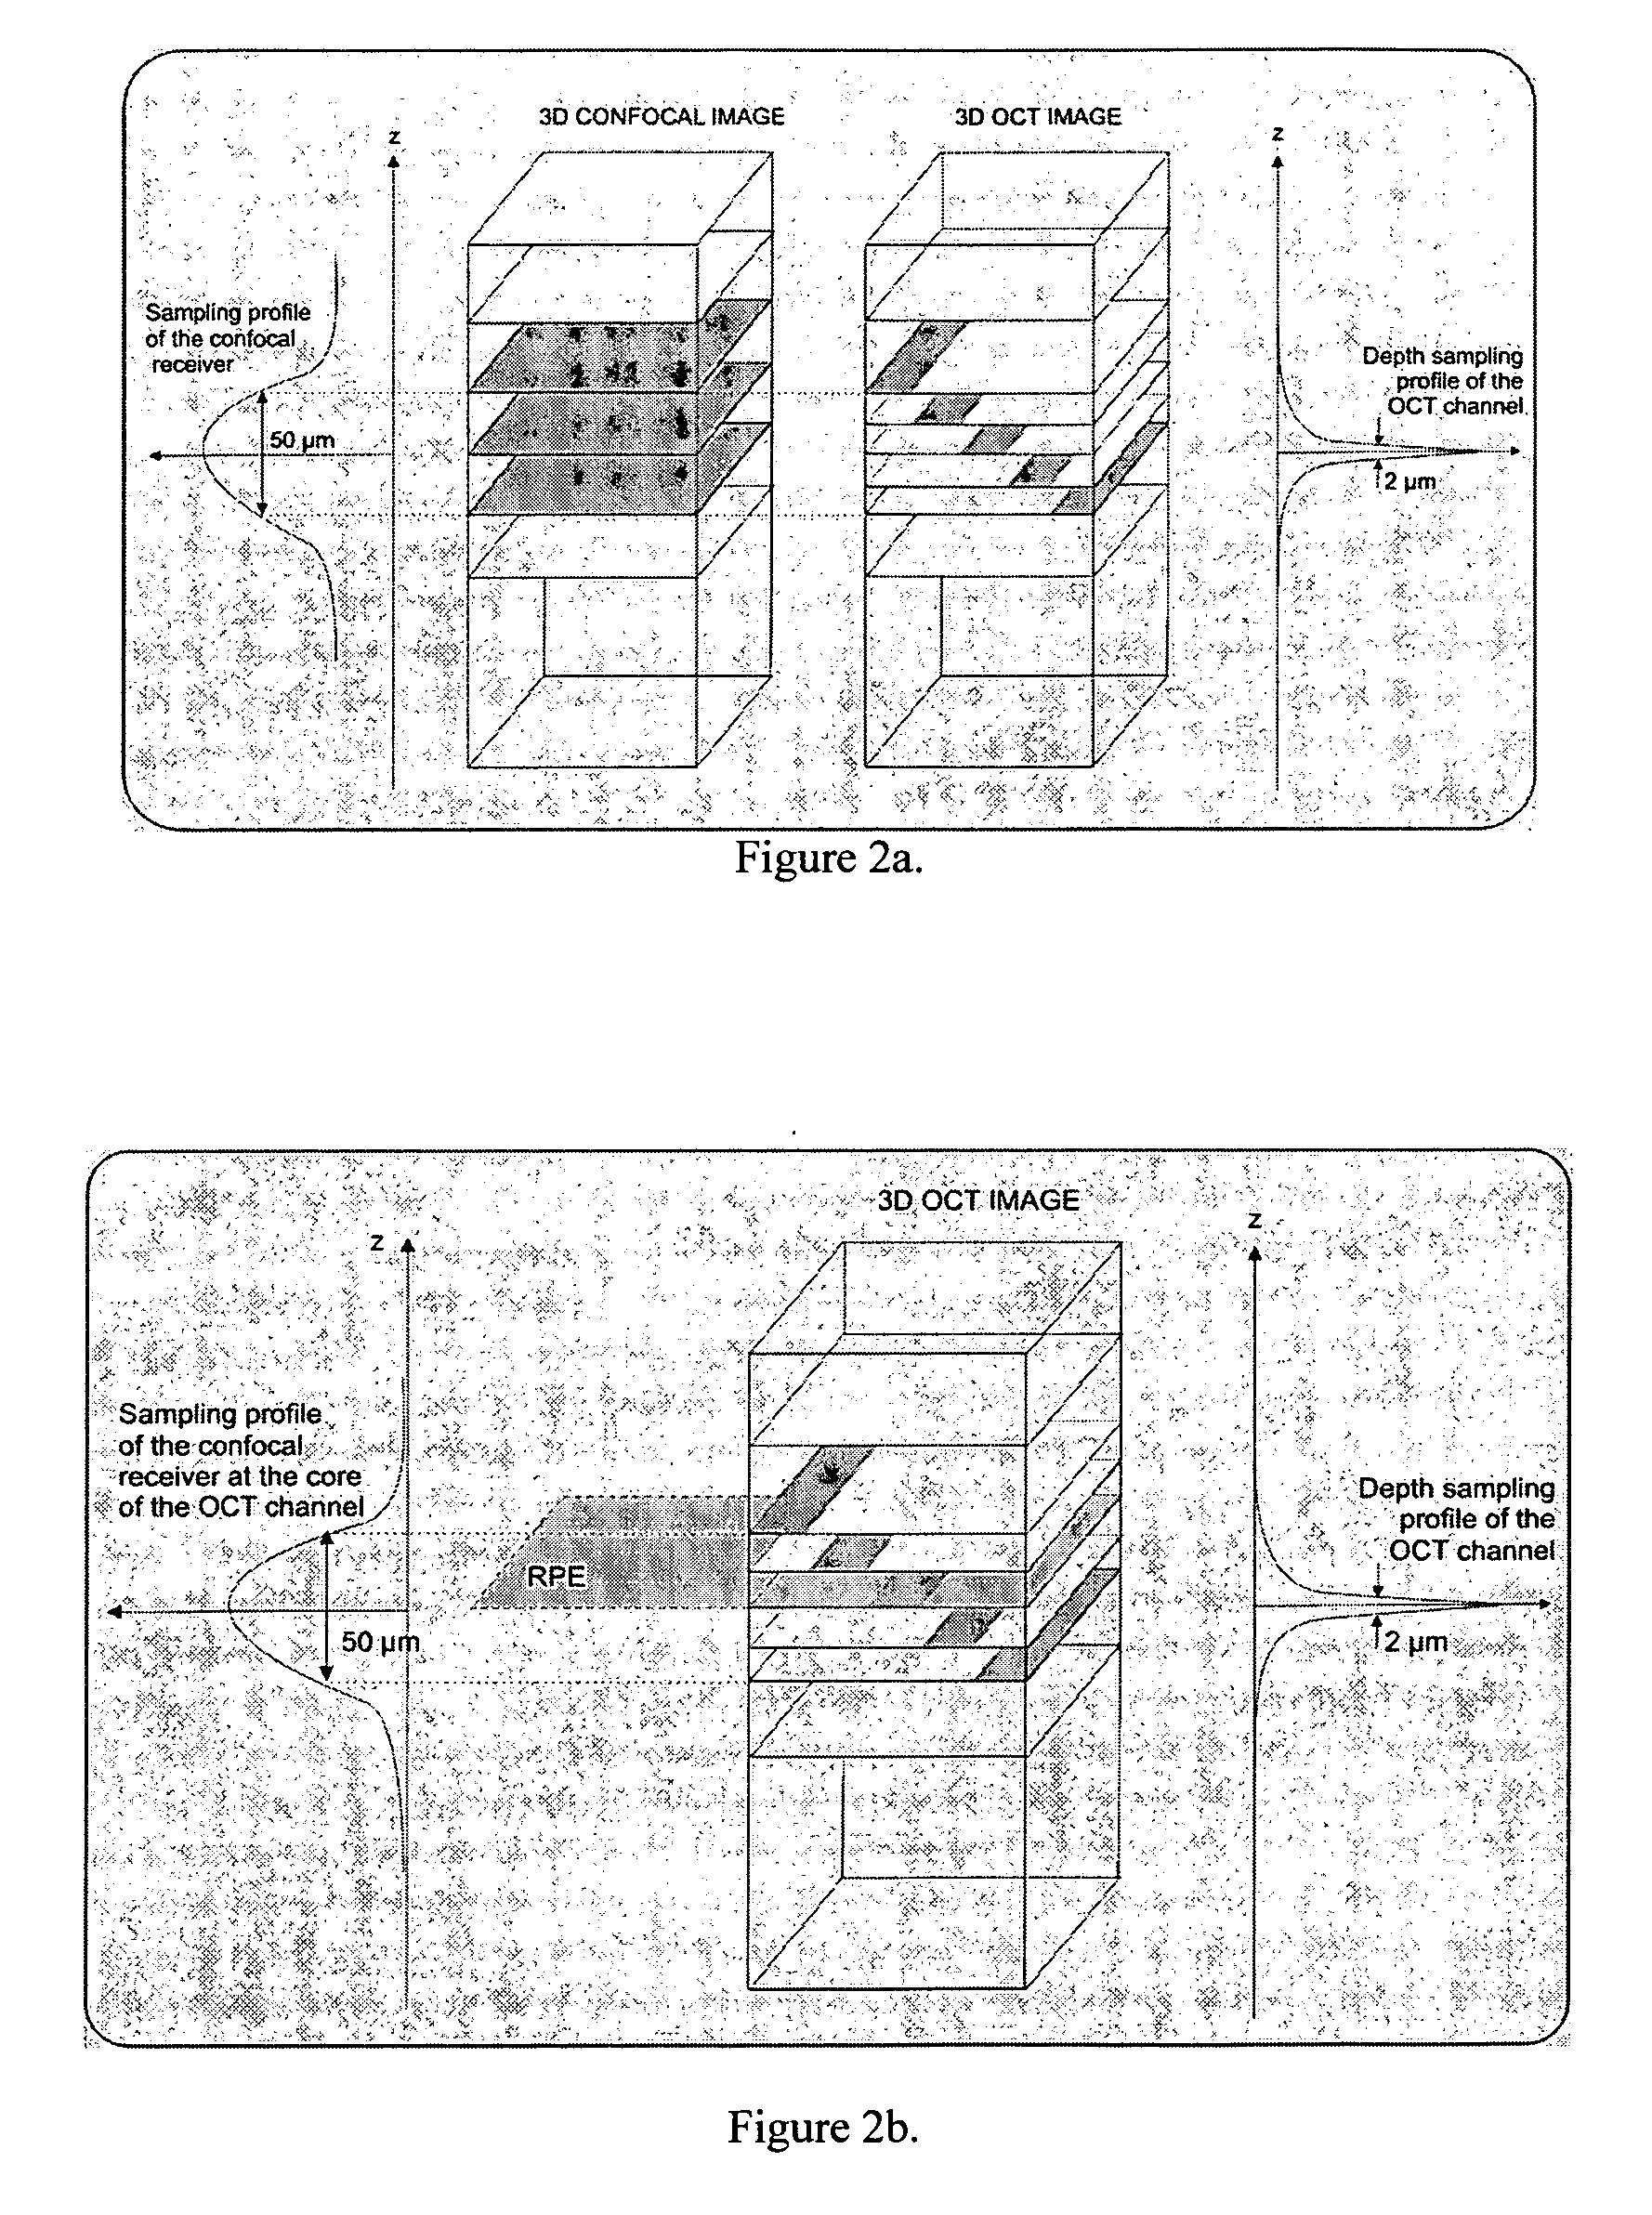 Optical mapping apparatus